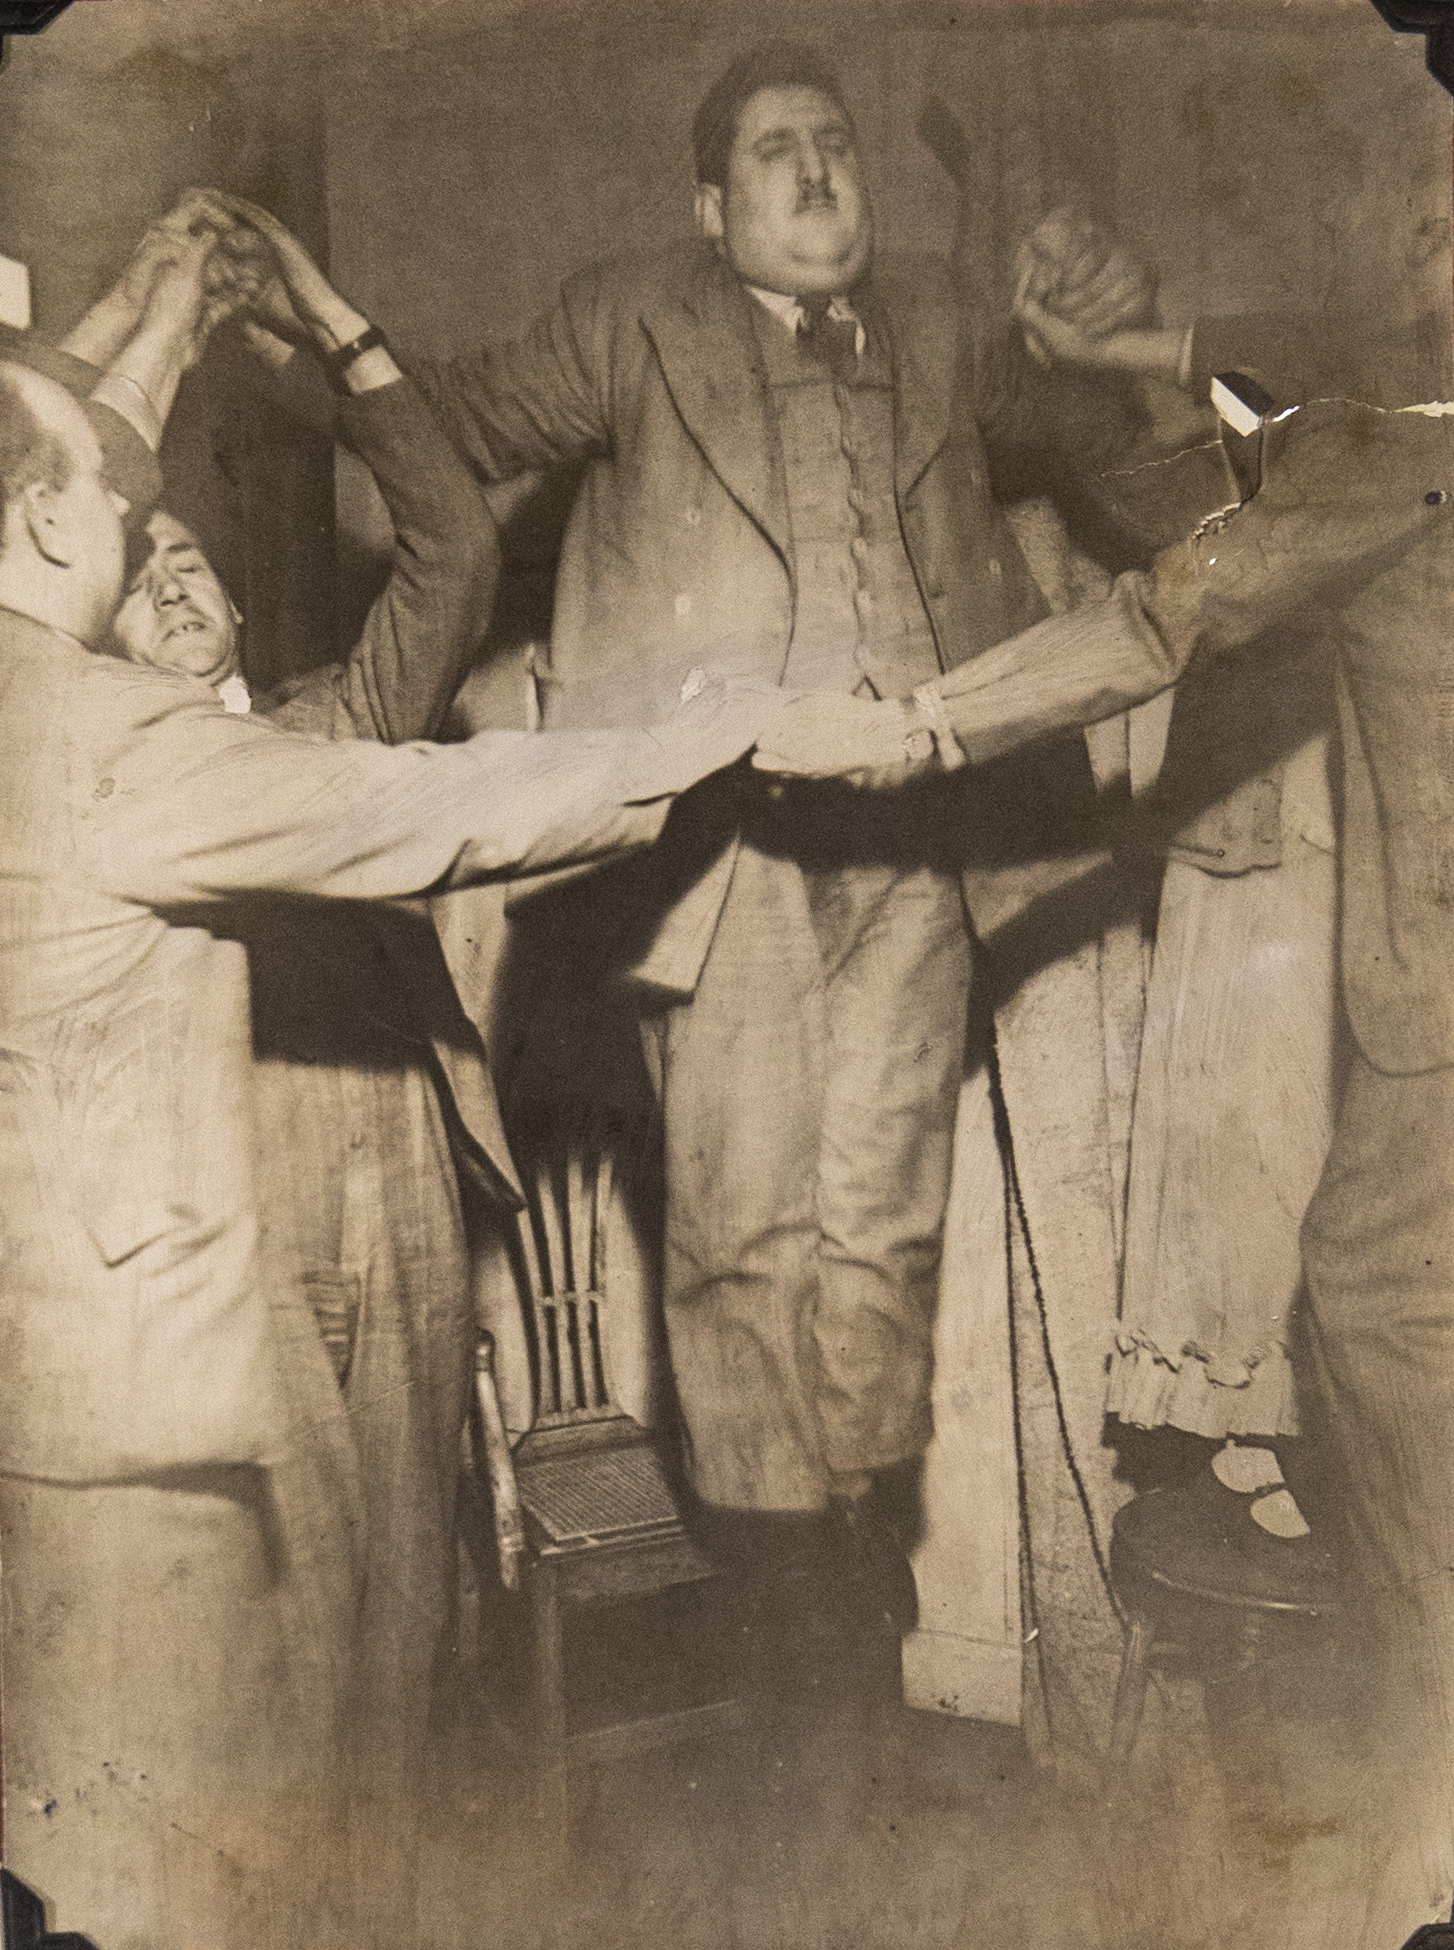 In an old sepia-toned photograph of a seance, a man appears to levitate